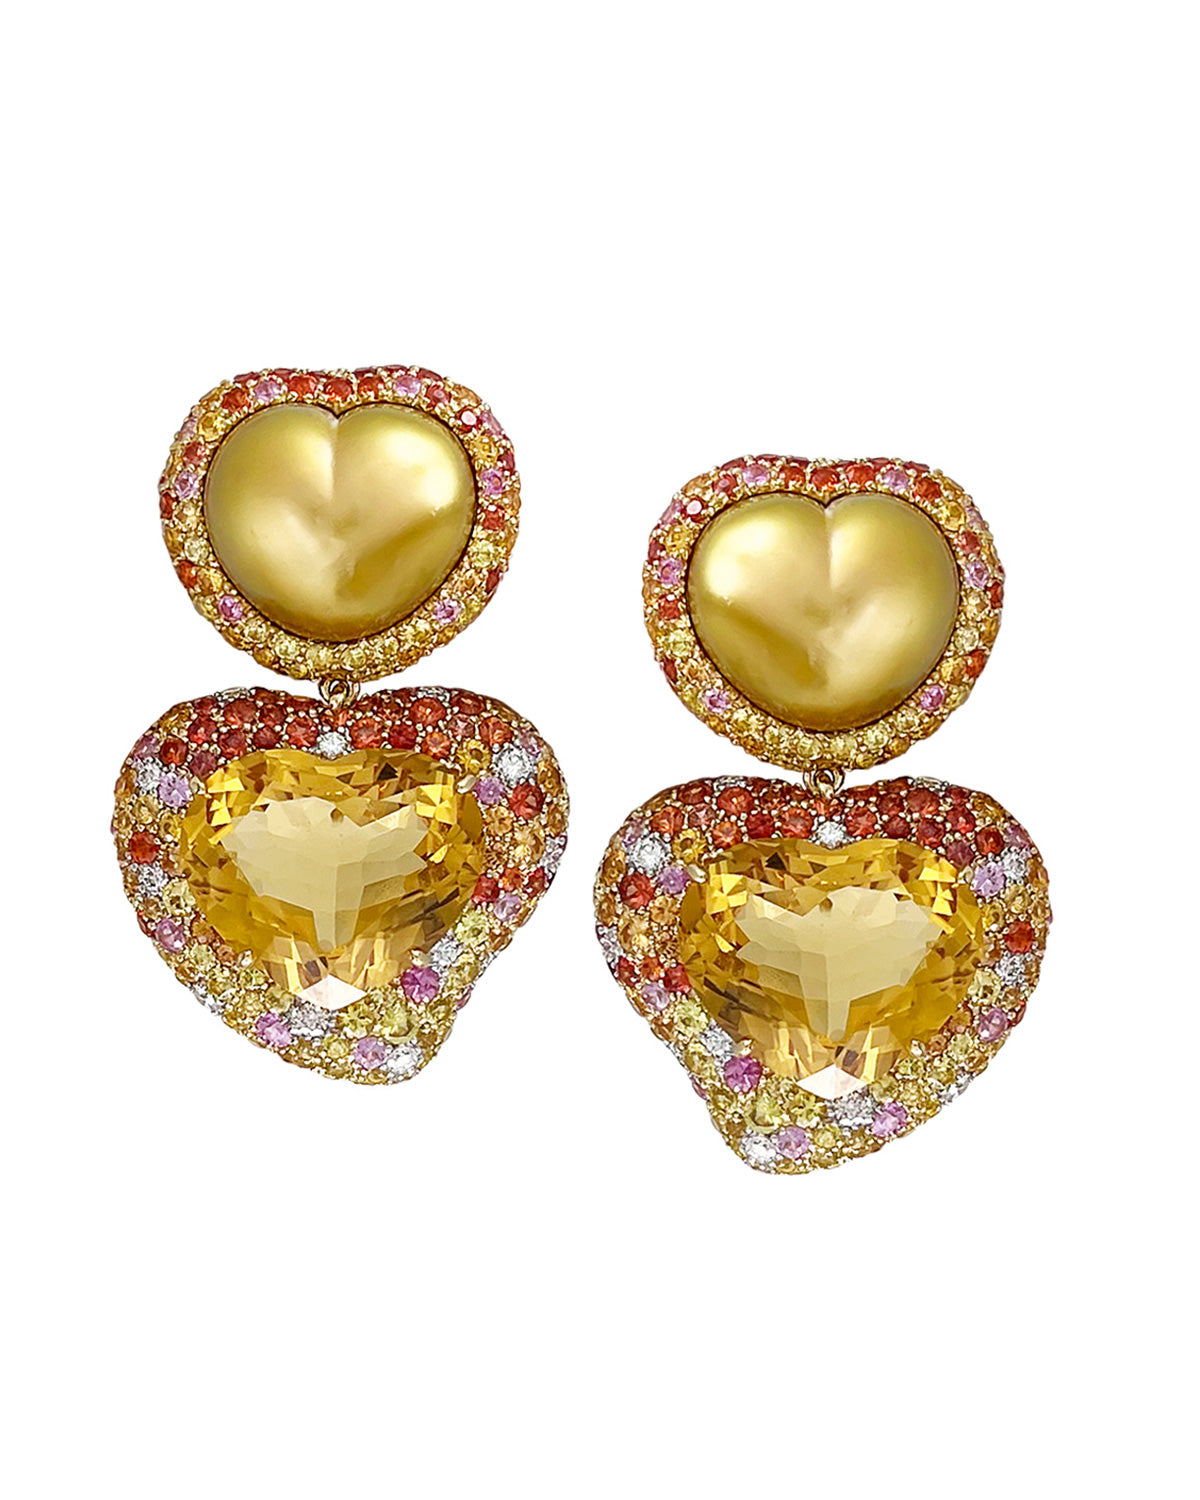 Golden Pearl and Citrine Heart Earrings